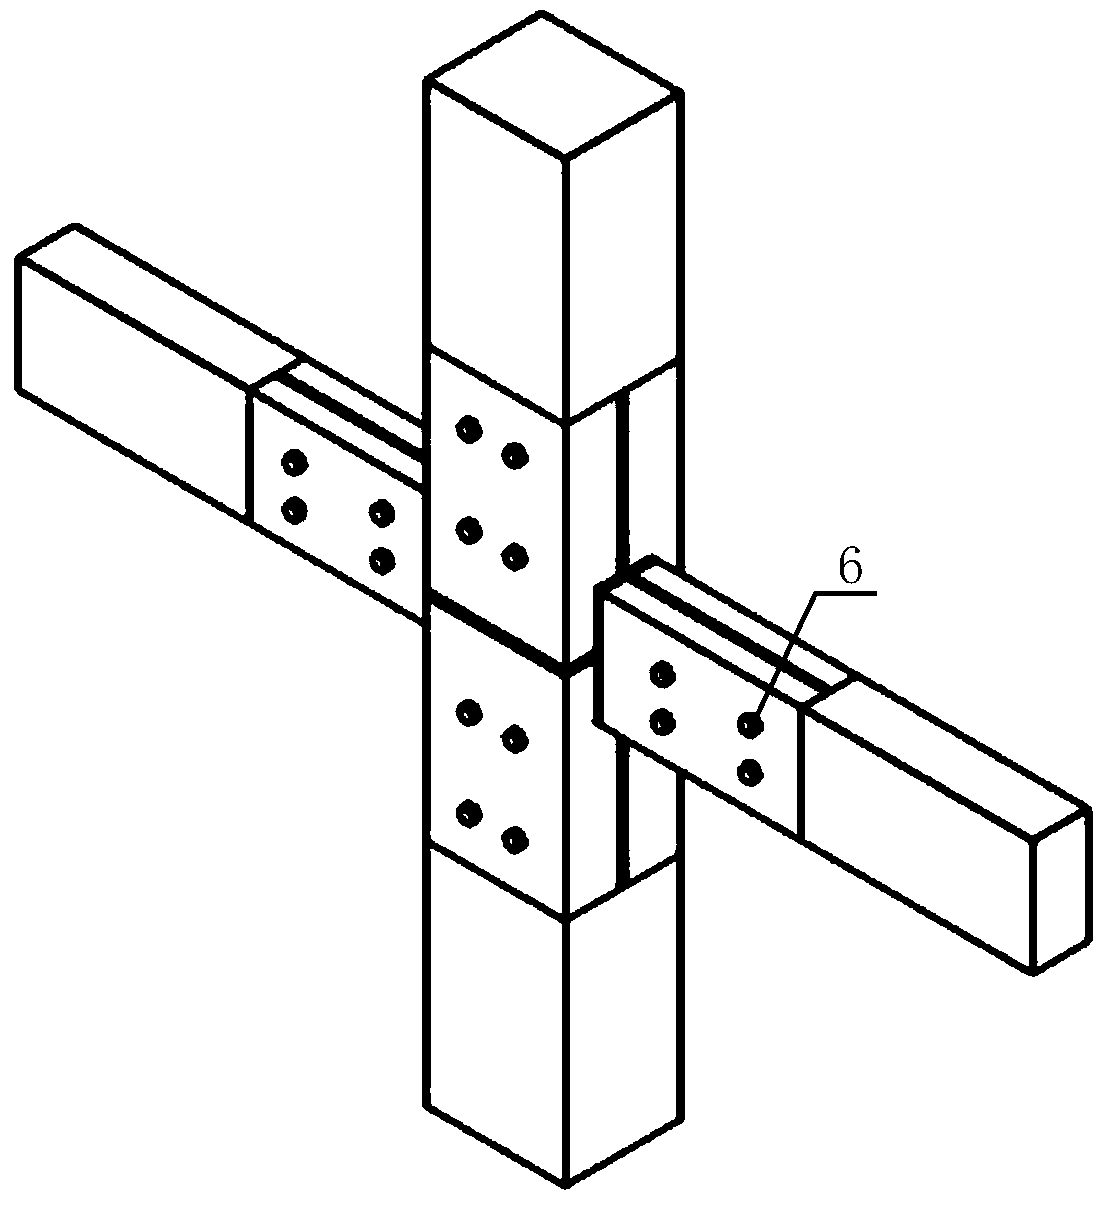 Node connecting structure for assembled bamboo wood beam column